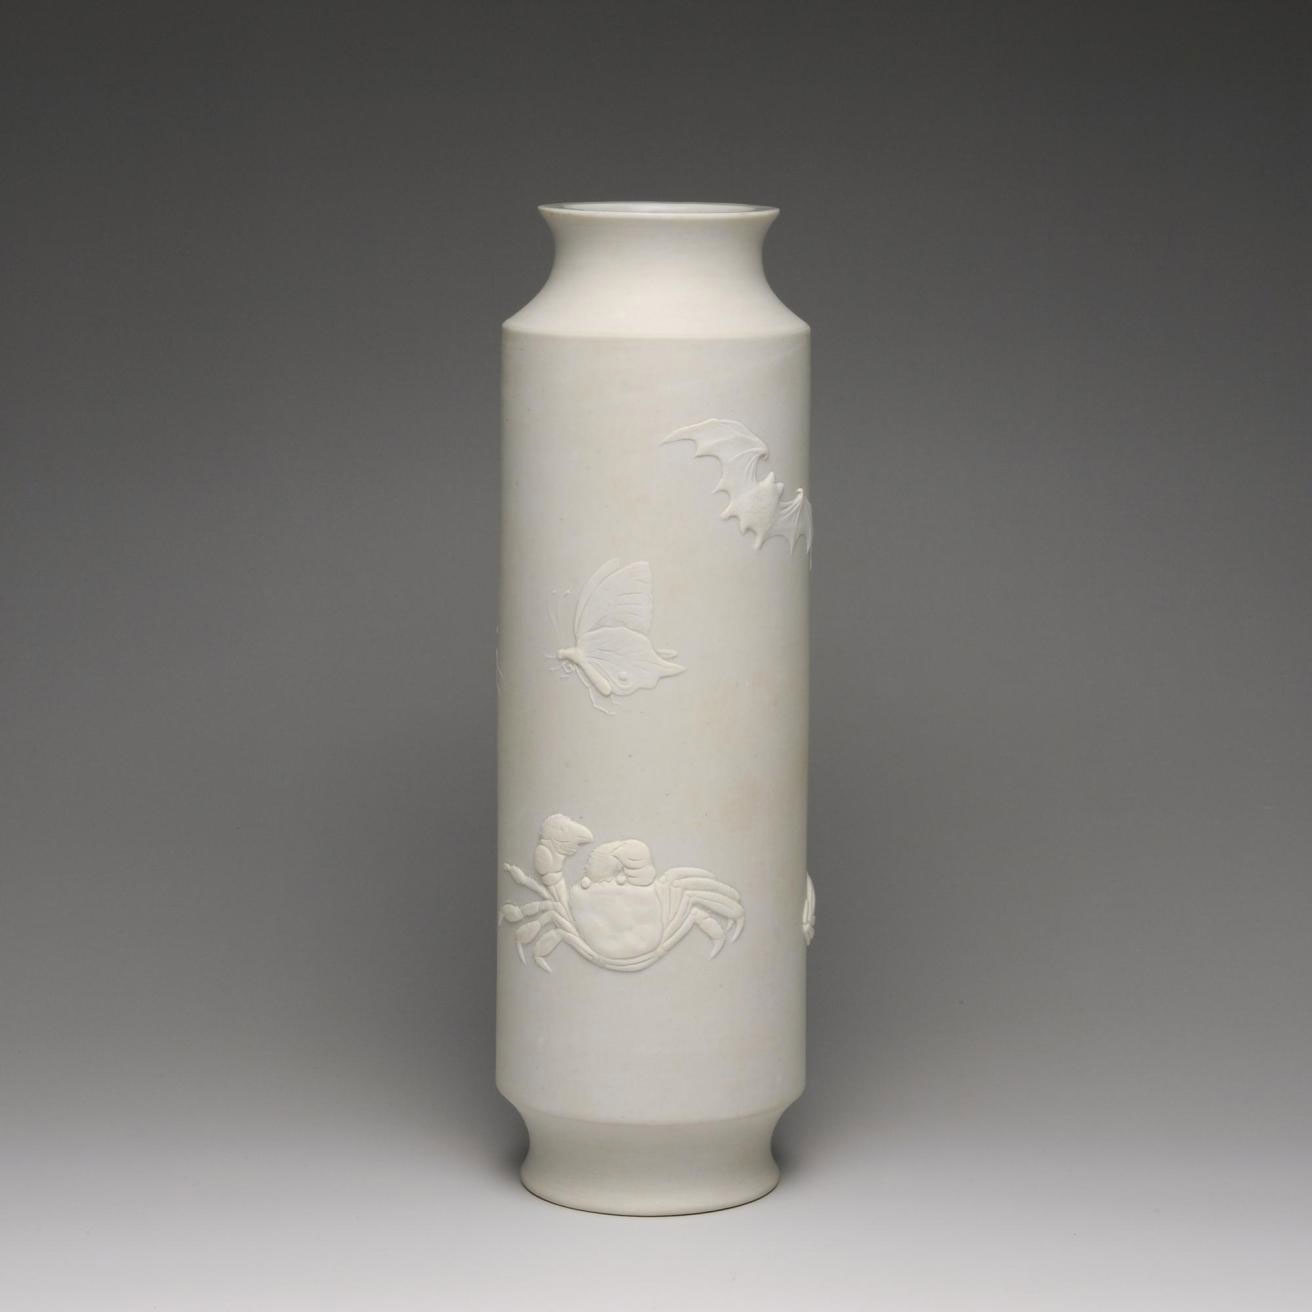 Bisque-fired cylindrical porcelain vase with decoration of insects and sea creatures in low relief: Japan, Hirado Mikawachi, by Yamoto, 1840-80.